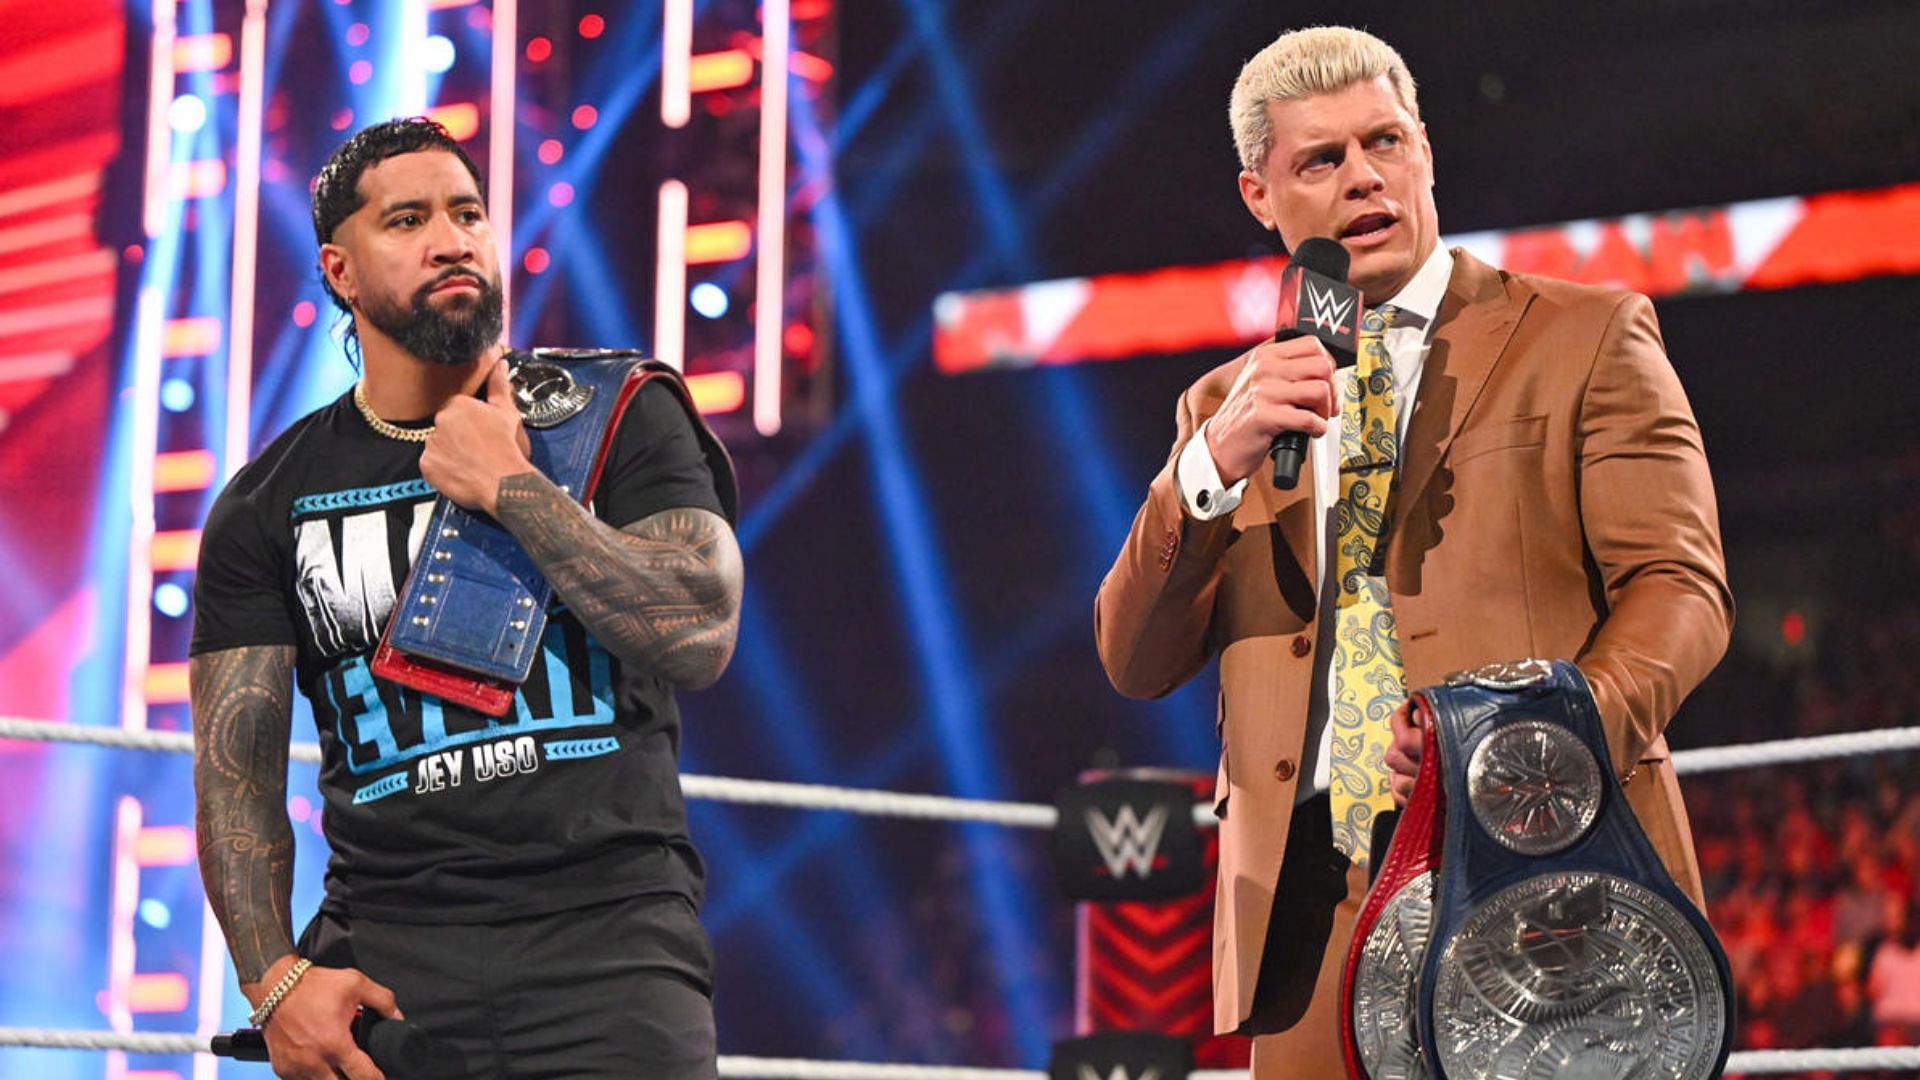 Cody Rhodes and Jey Uso were the Undisputed WWE Tag Team Champions!